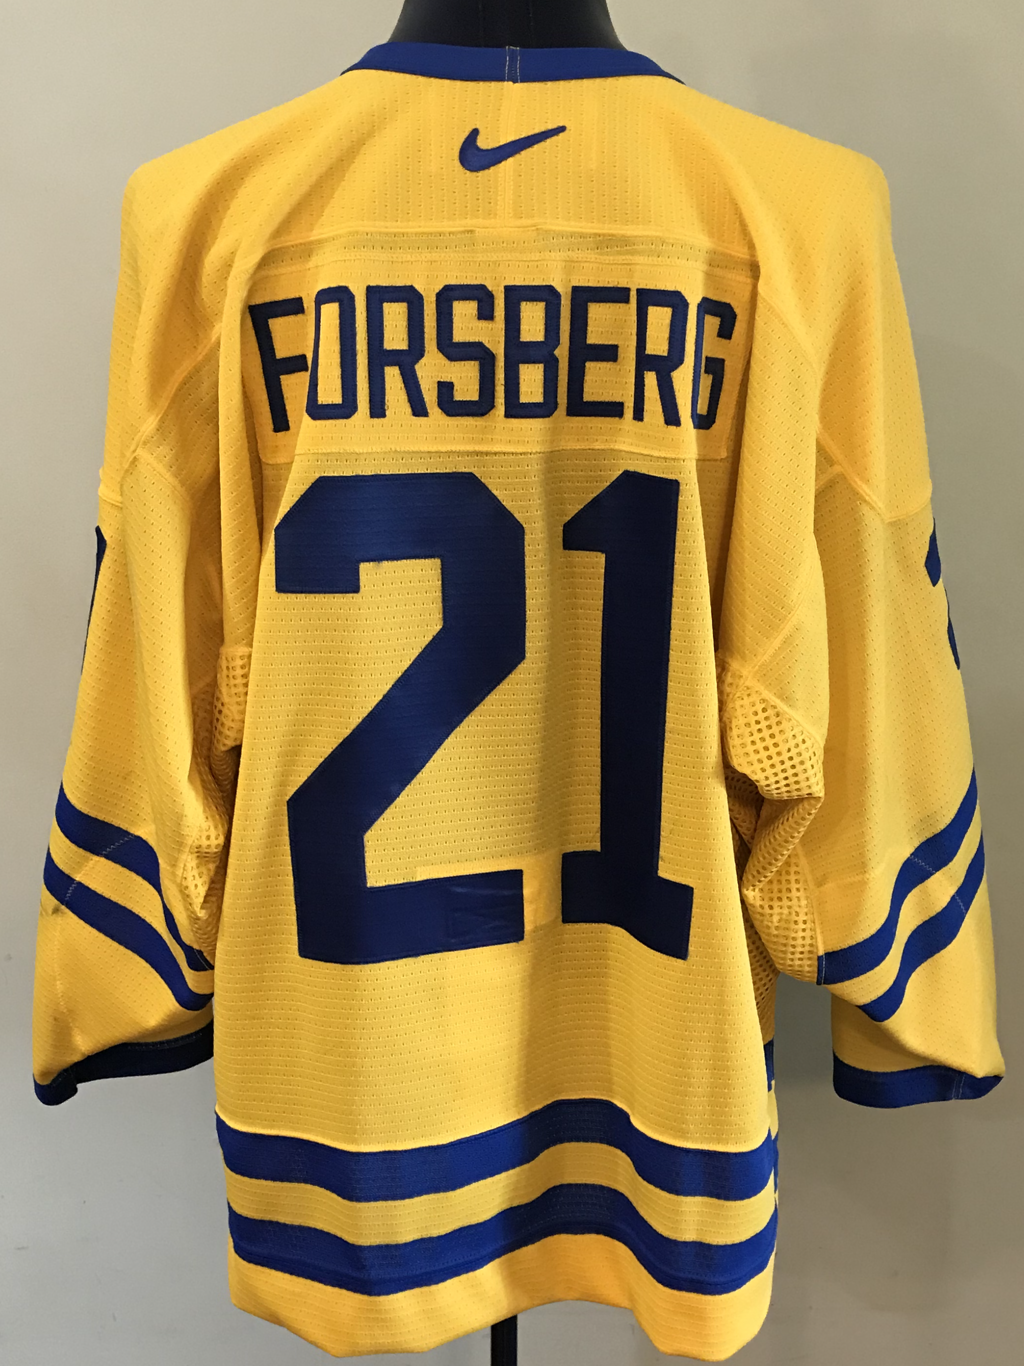 1998-99 Peter Forsberg Colorado Avalanche Game Worn Jersey (Photo